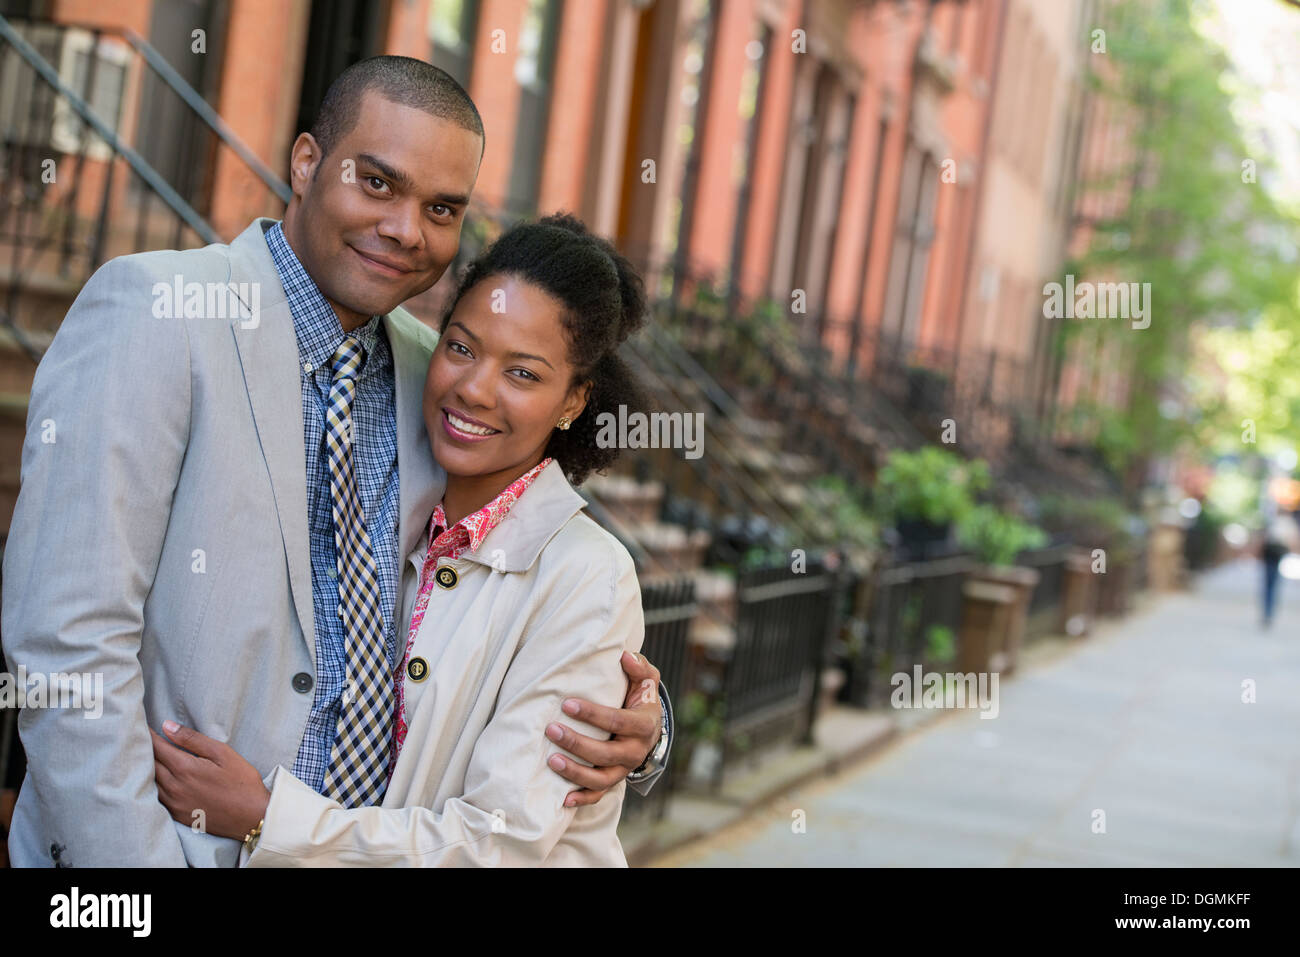 A couple standing side by side on a city street. Stock Photo